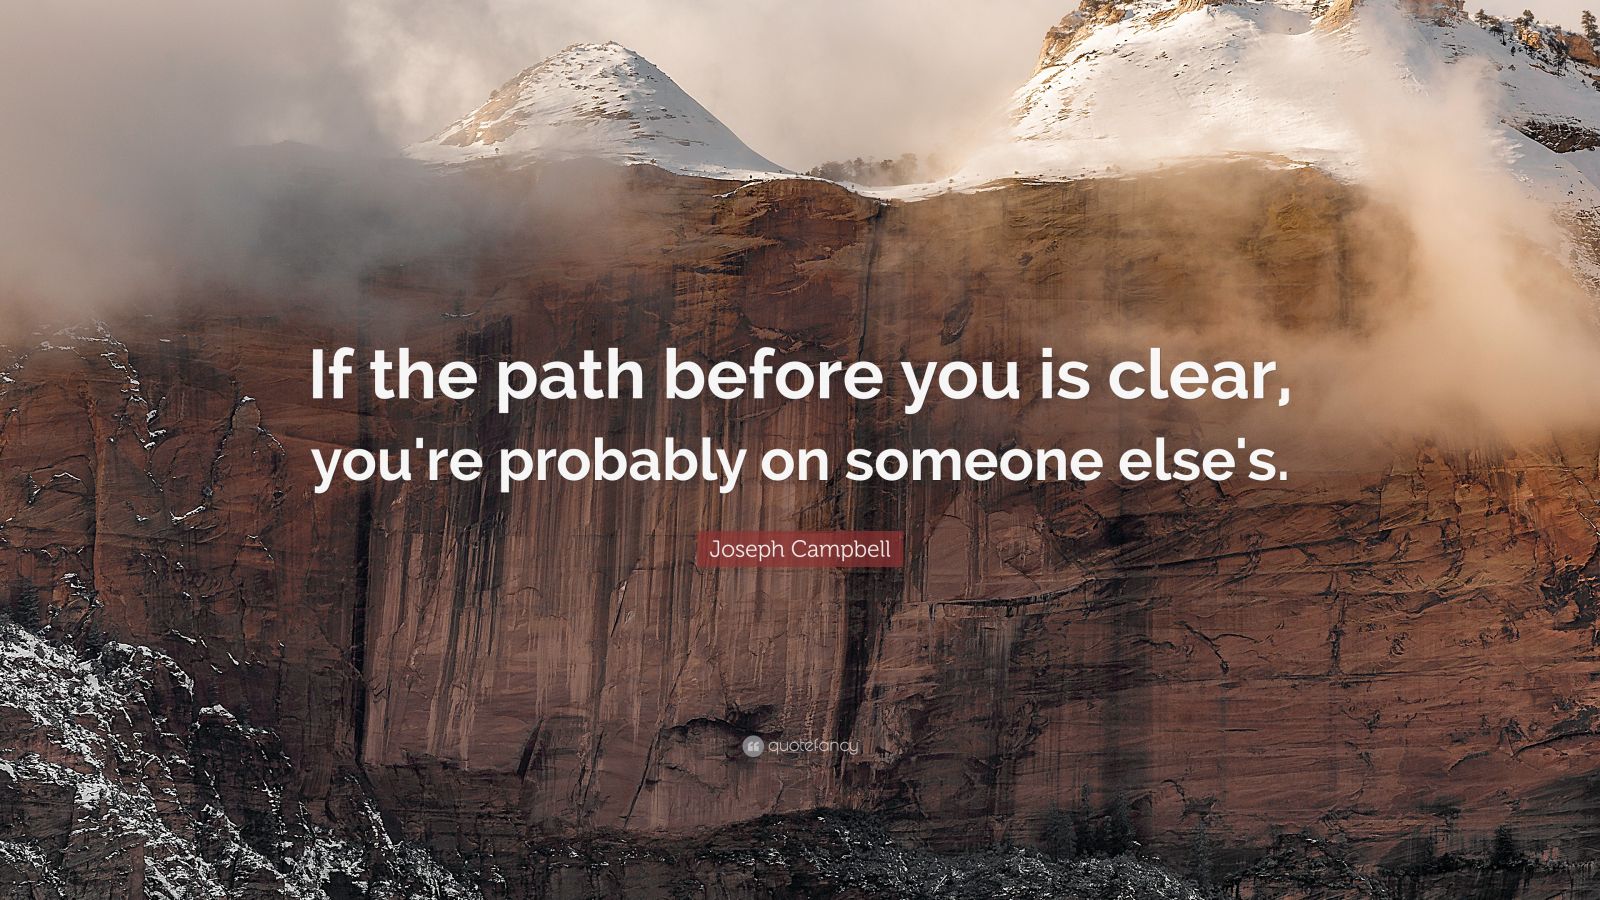 Joseph Campbell Quote: "If the path before you is clear ...